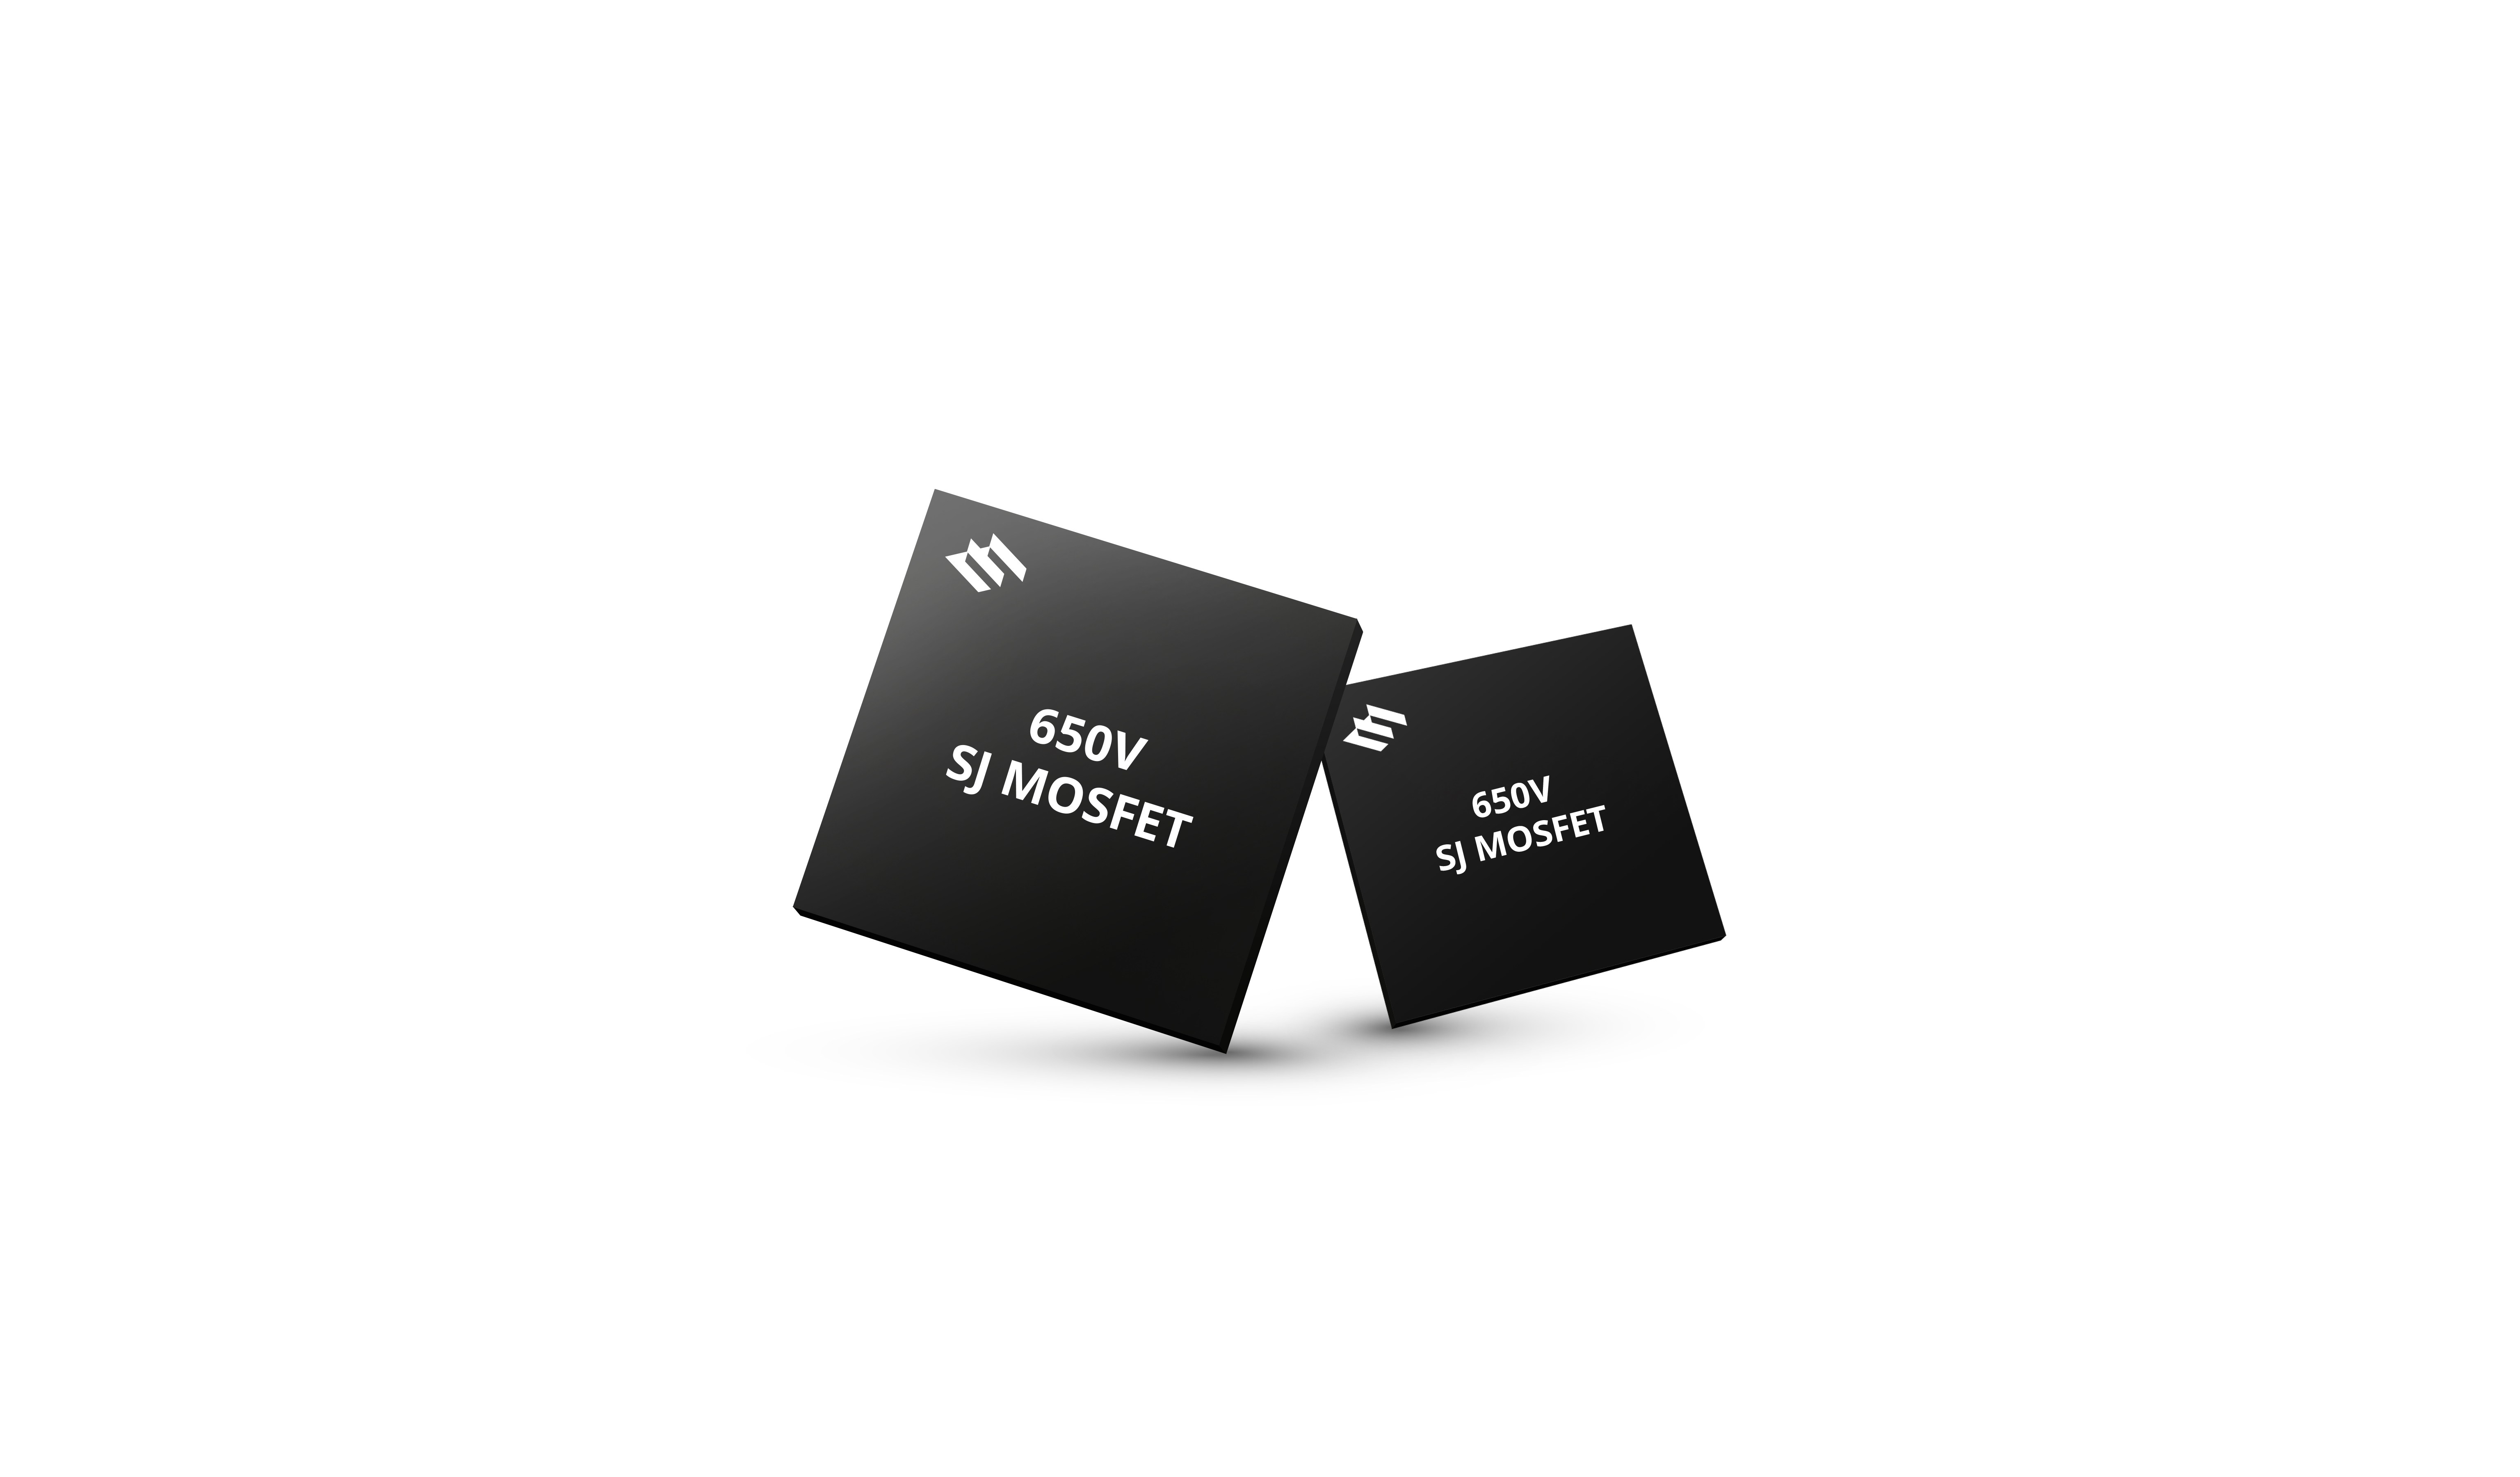 Magnachip introduces two 650V SJ MOSFETs packaged in a PDFN88 + logo